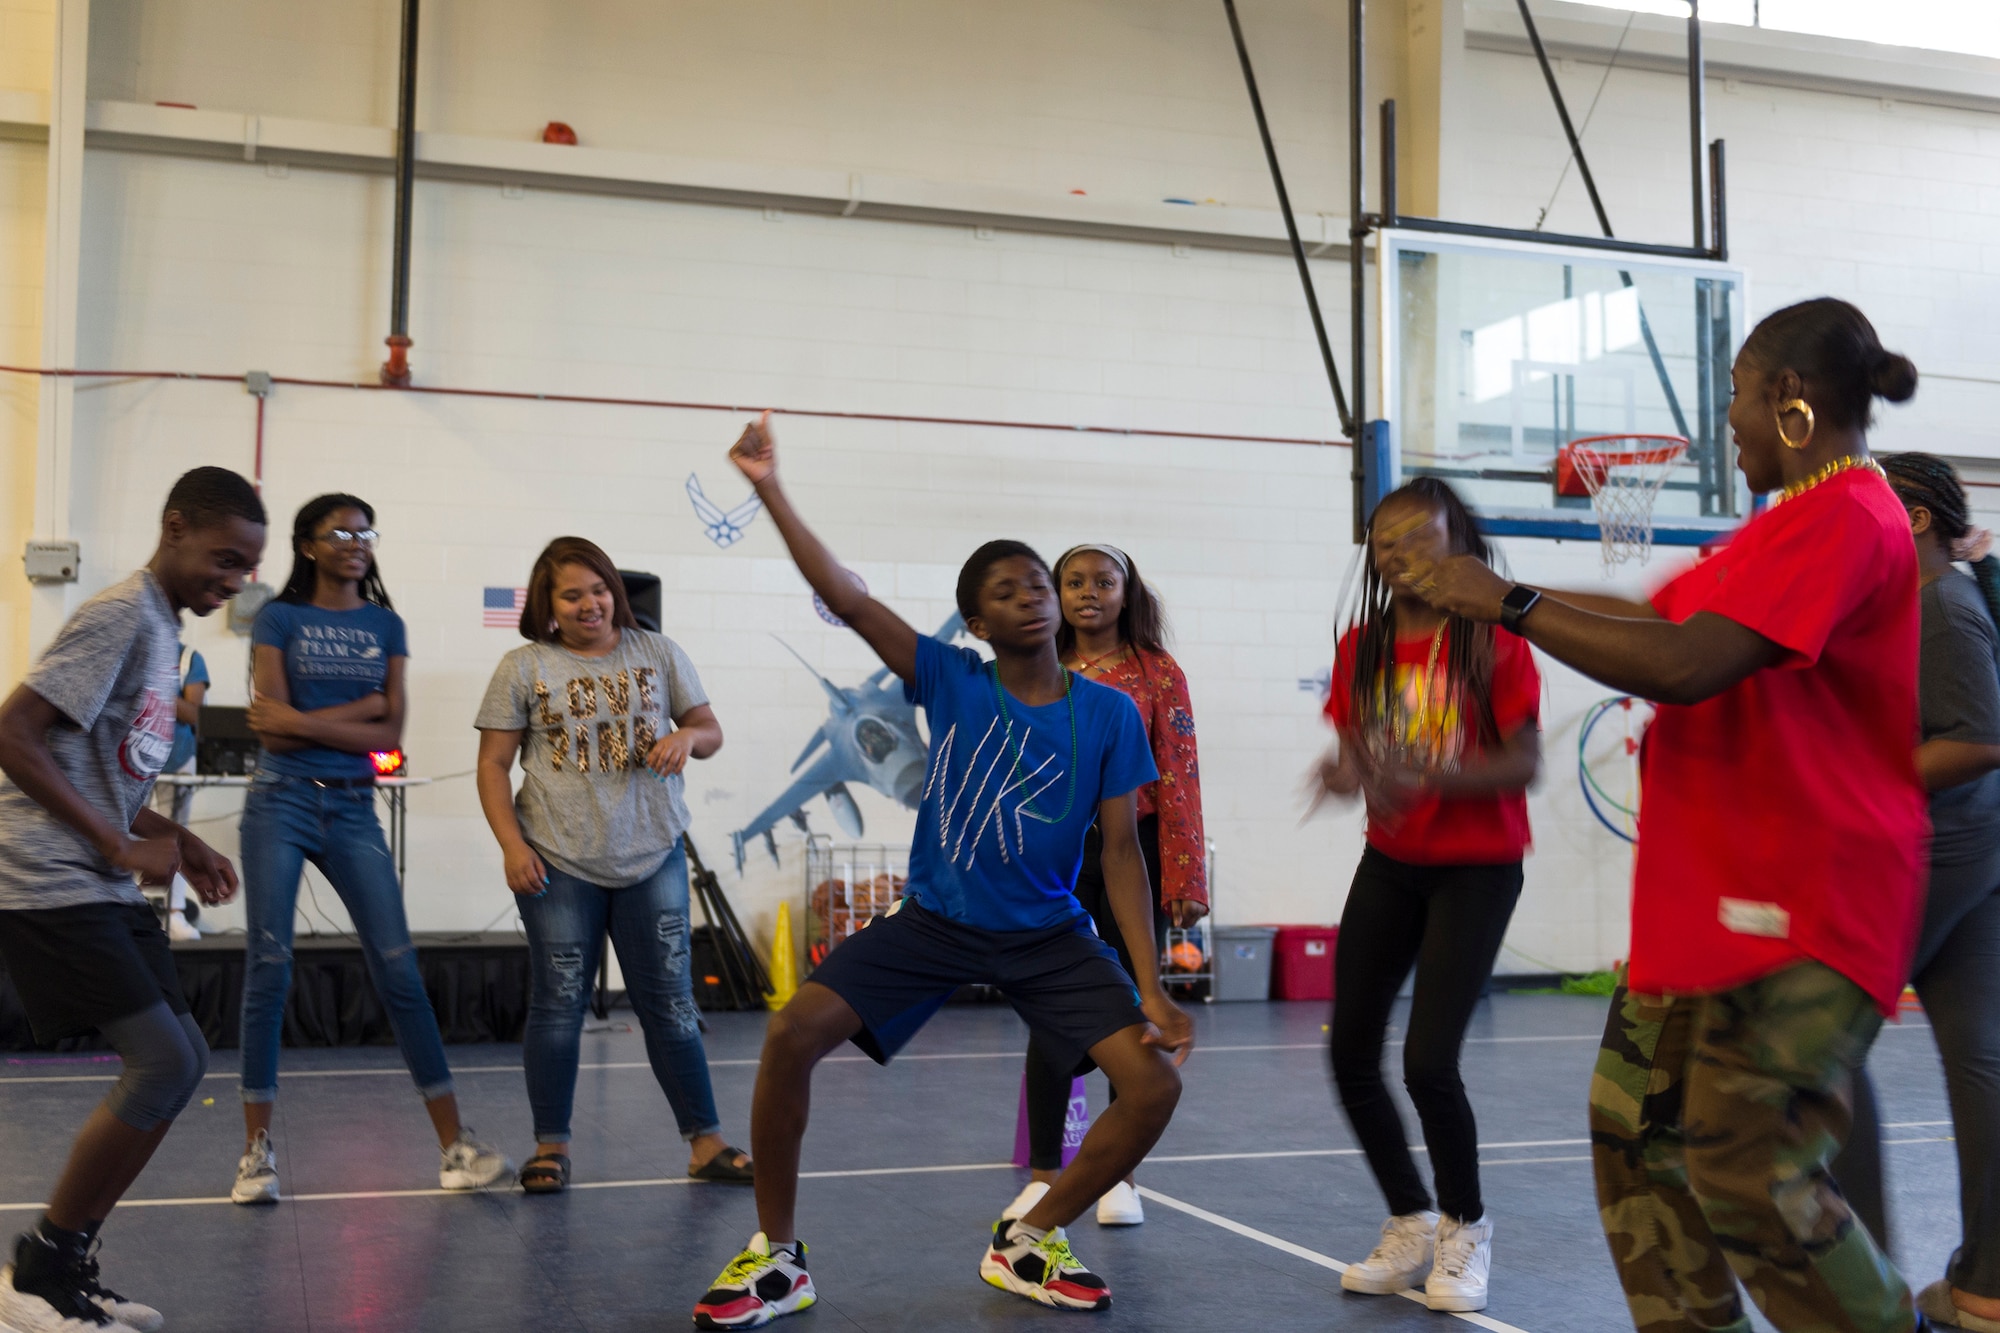 Participants dance during a youth dance party, April 12, 2019, at Moody Air Force Base, Ga. Team Moody showed its support for military children by hosting a number of events during Month of the Military Child in April. (U.S. Air Force photo by Airman 1st Class Hayden Legg)